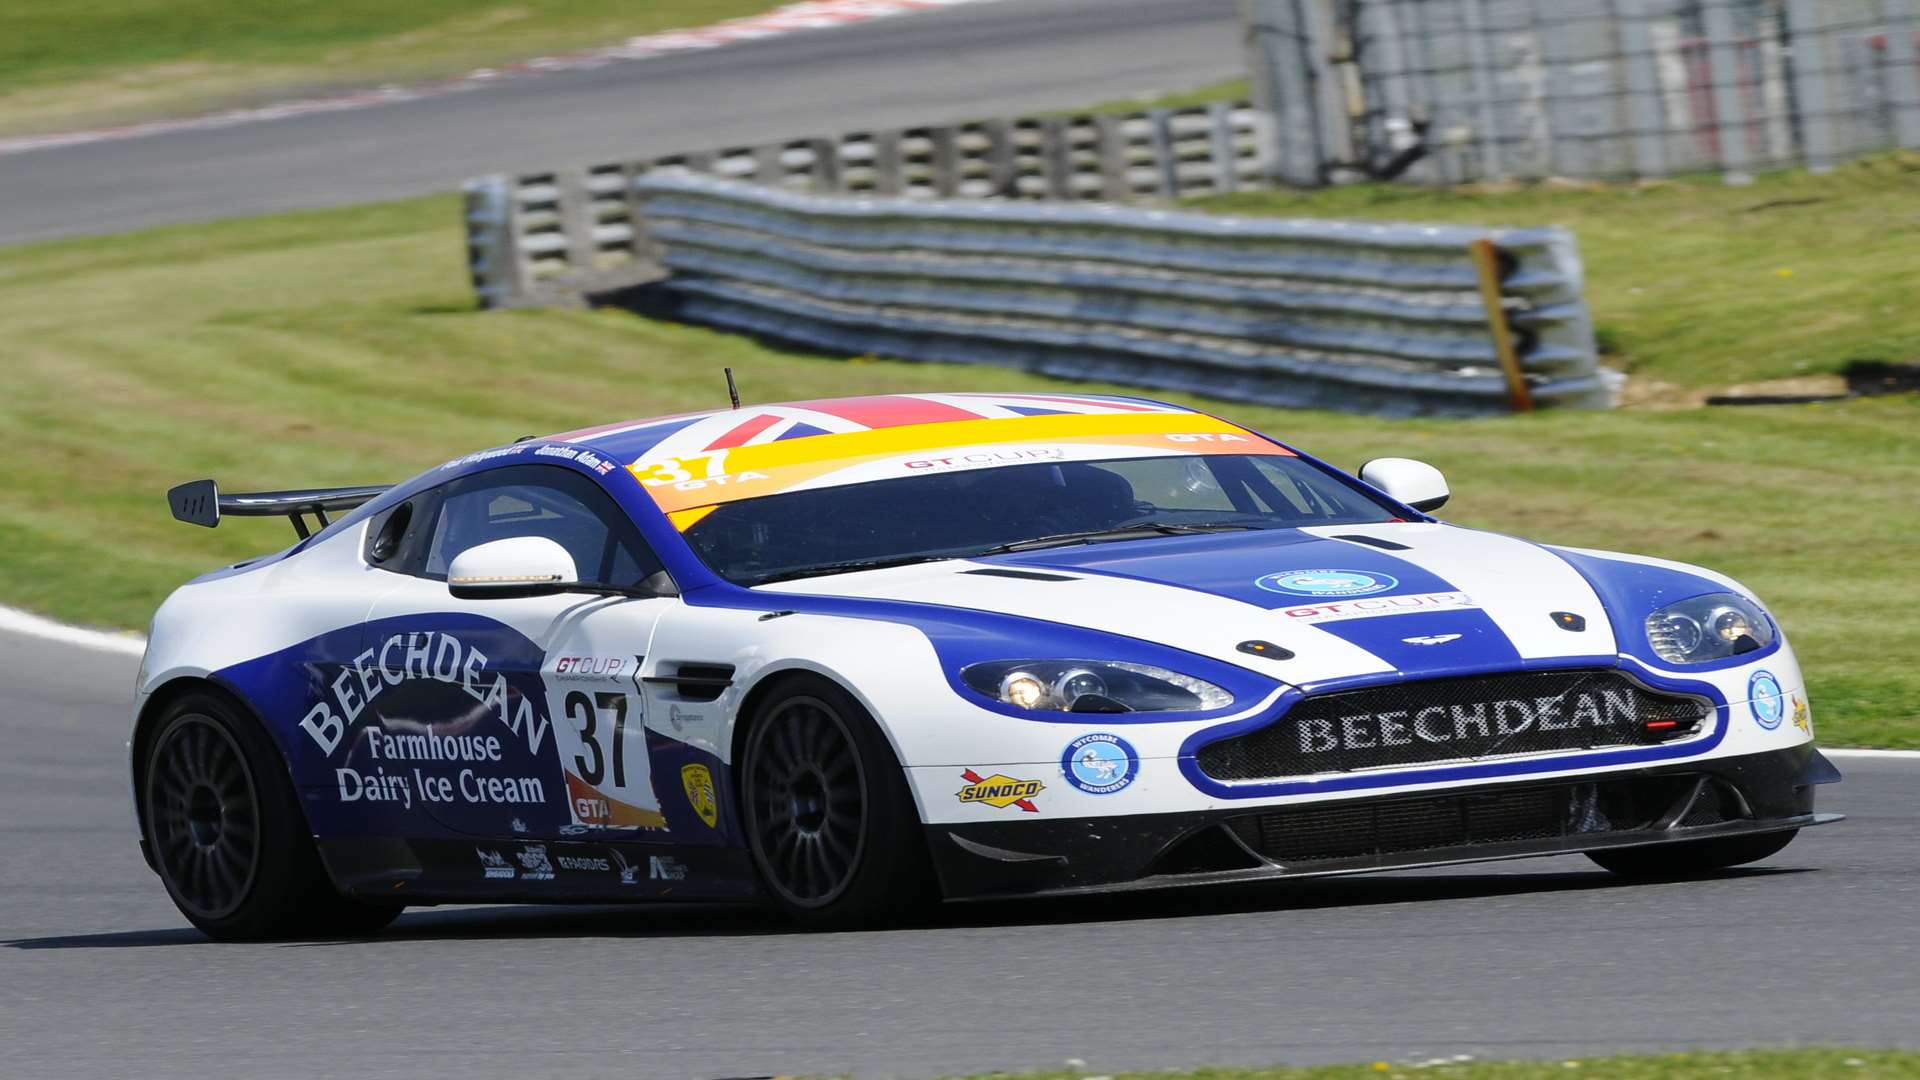 TV's Paul Hollywood winning his class in the GT Cup race at Brands Hatch in May Picture: Simon Hildrew